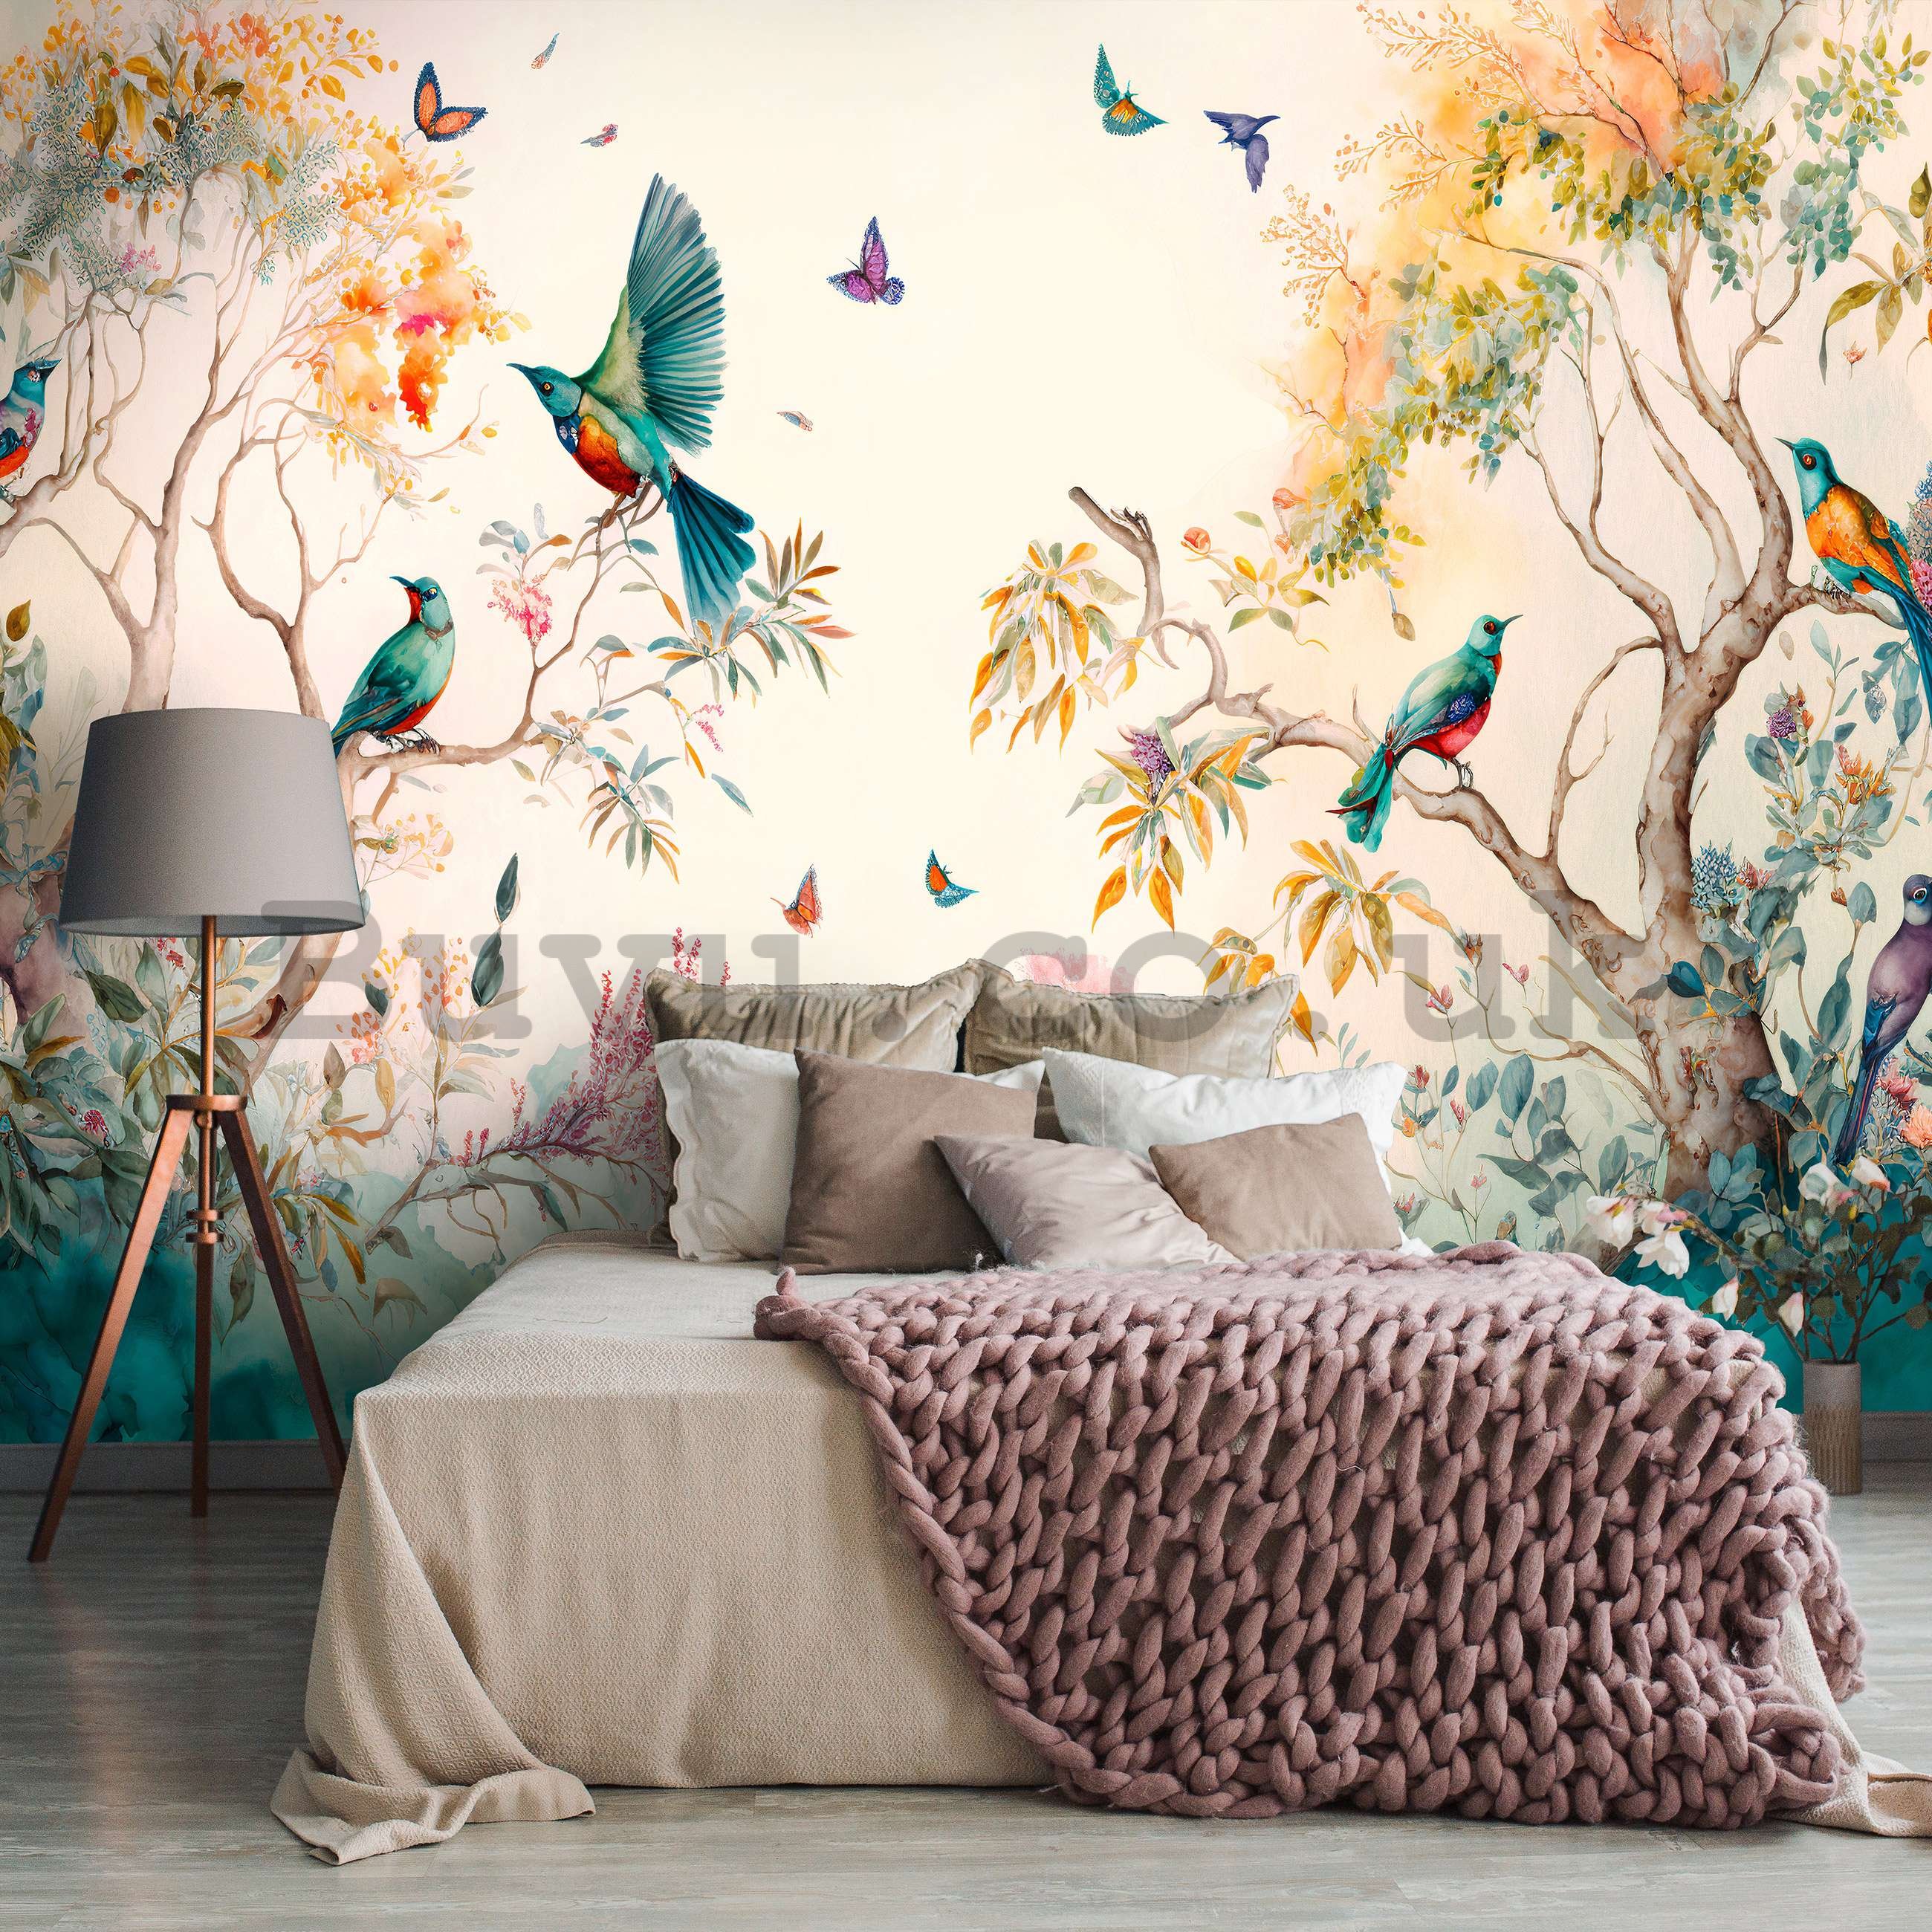 Wall mural vlies: Birds on trees (painted) - 368x254 cm